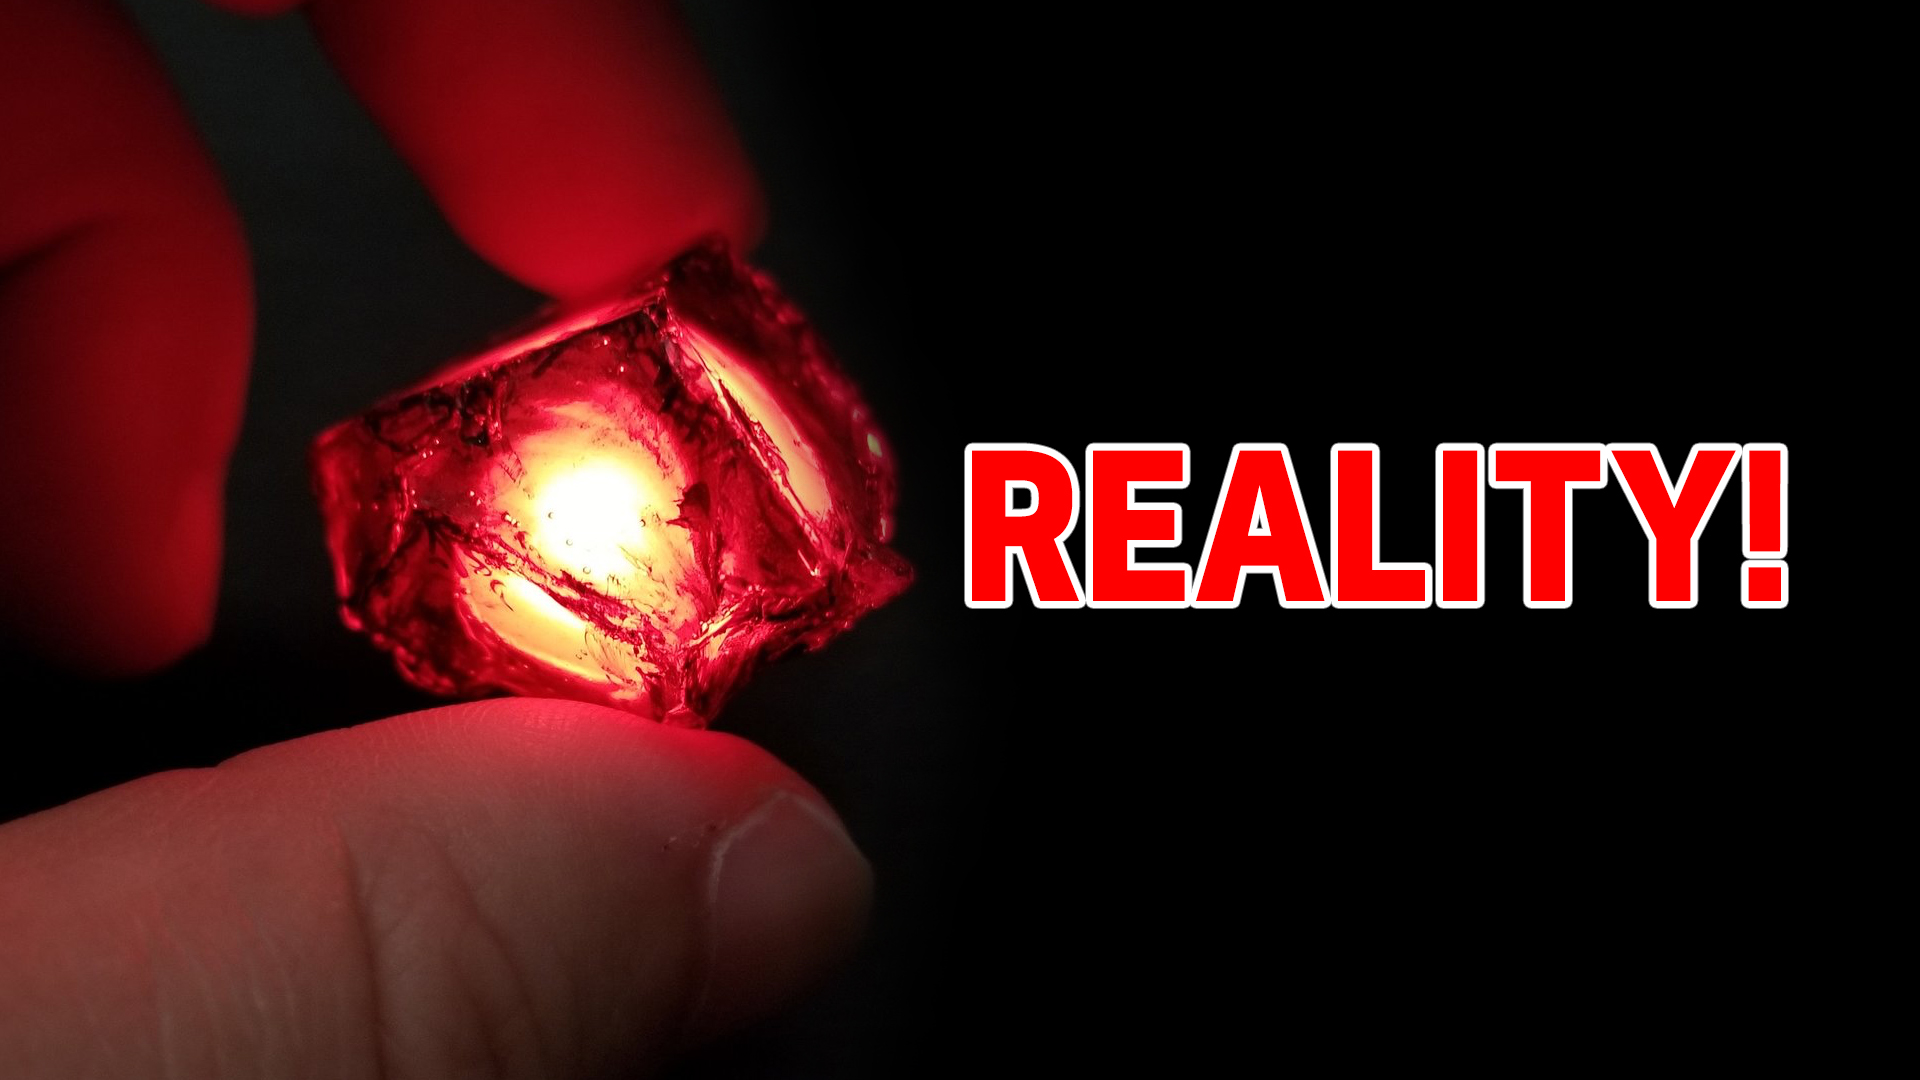 Red infinity stone